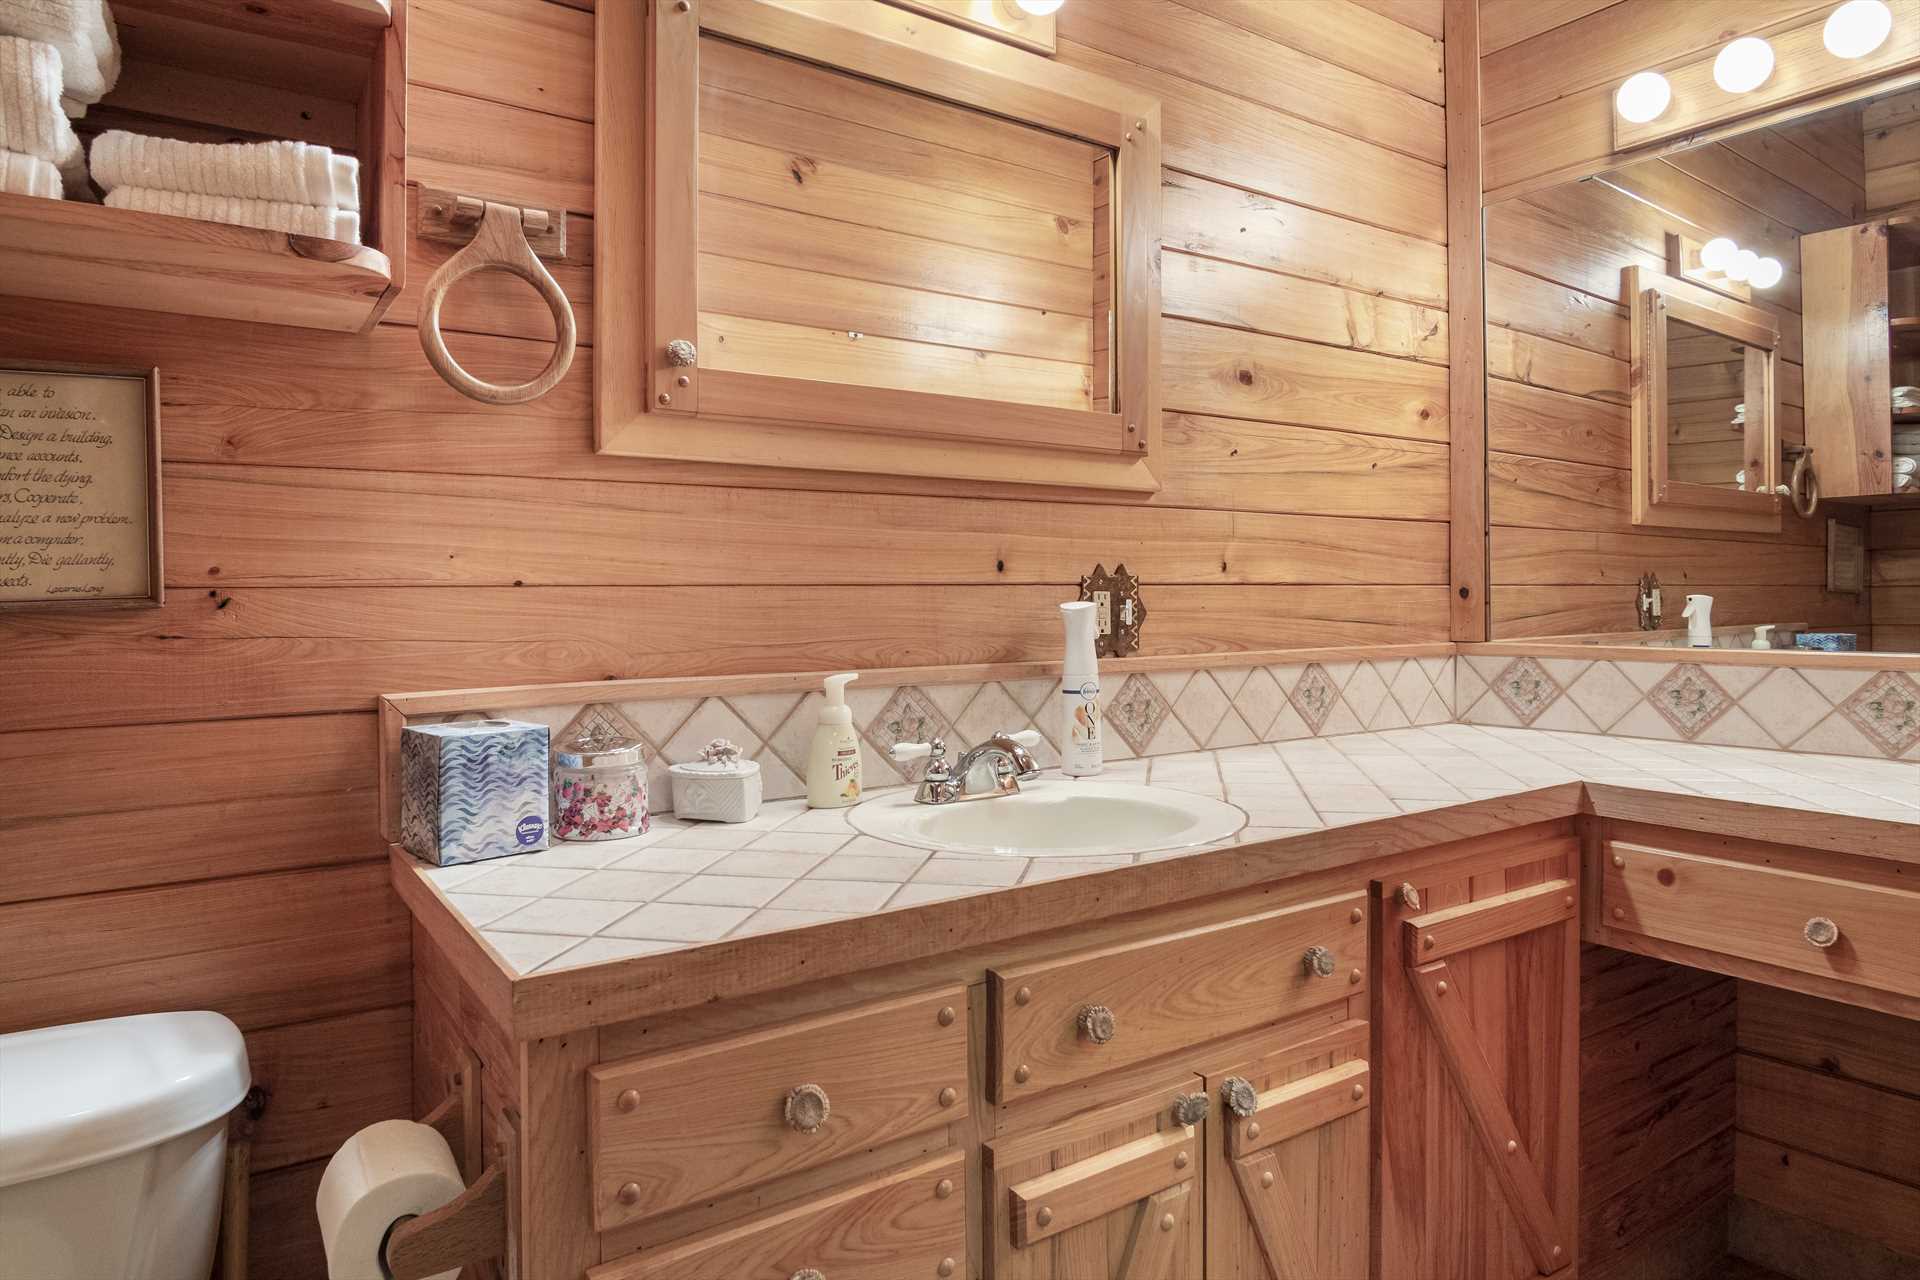                                                 There's plenty of toiletry space alongside the vanity in the Whitetail Room's full bath!